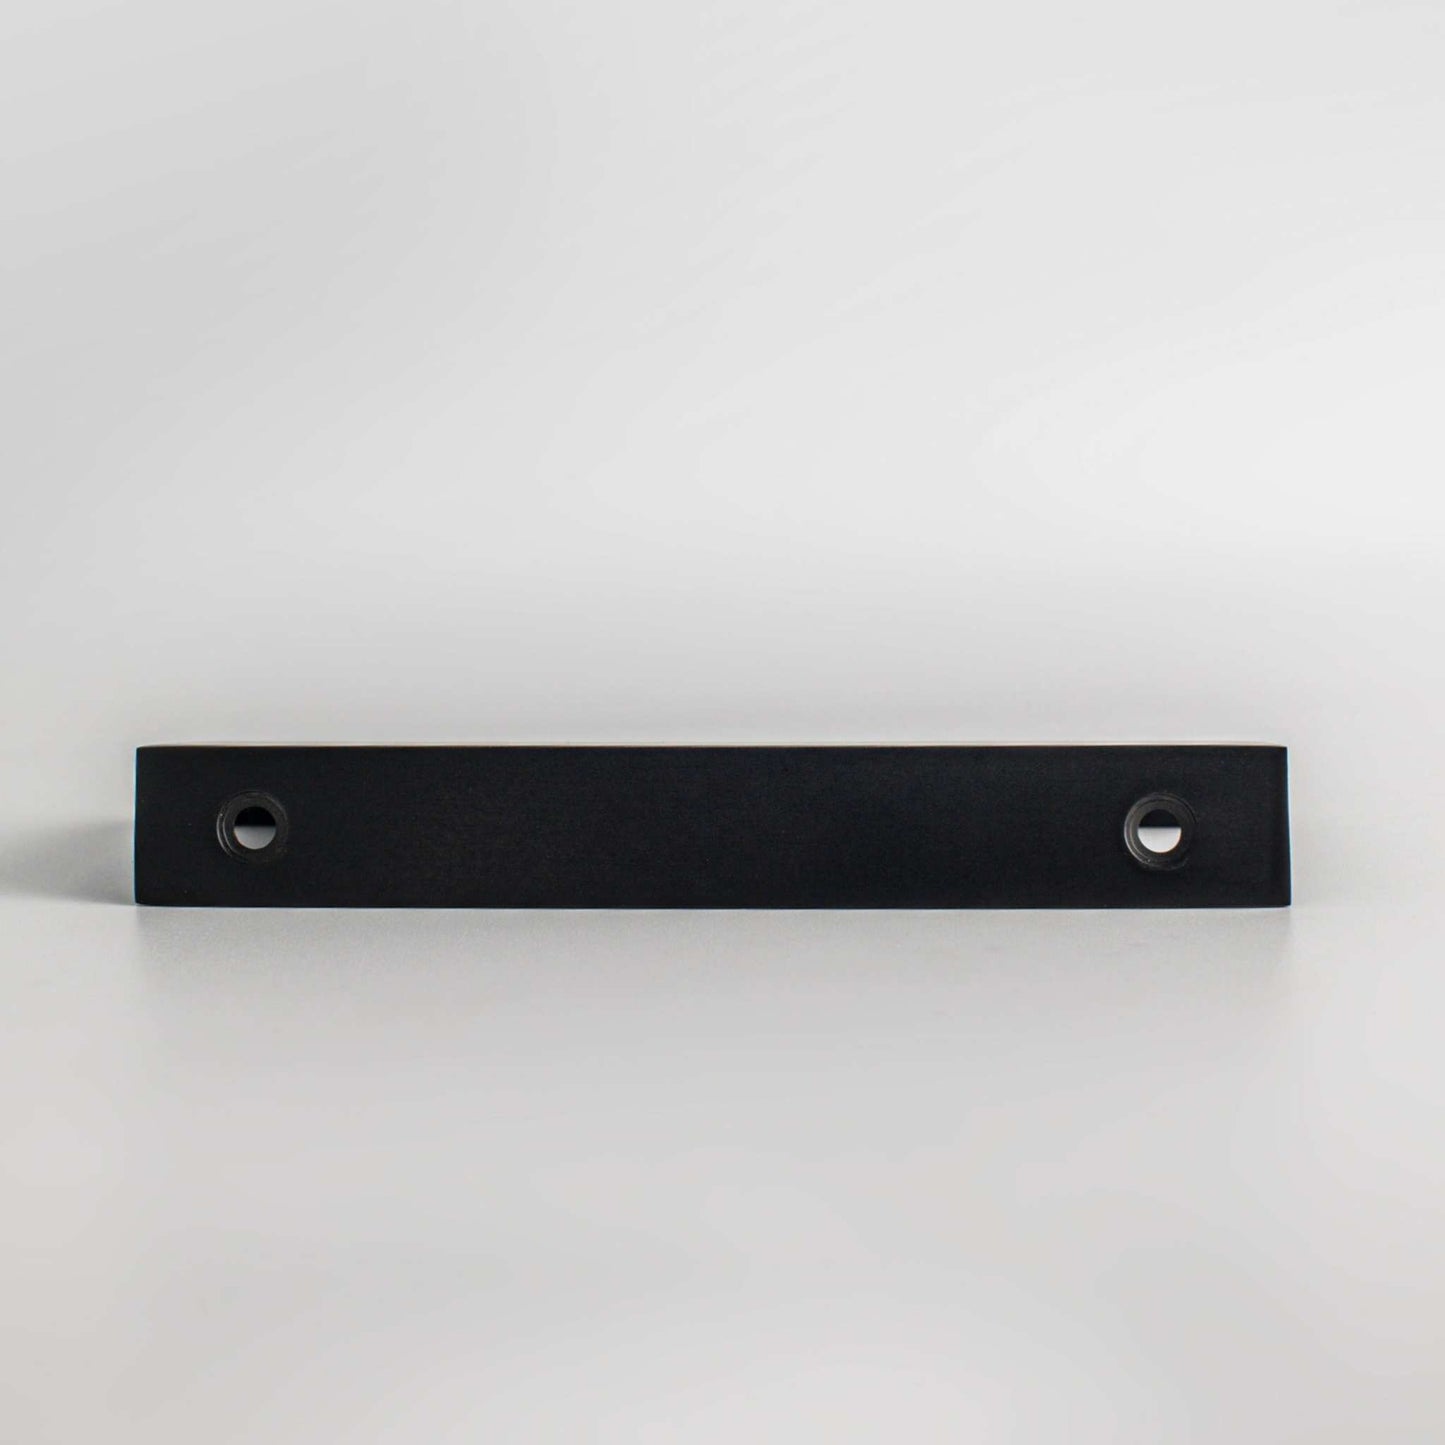 Matte Black Edge Pull, Solid Brass Edge Pull

Available Materials and Finishes:

Made of solid brass with a matte black finish.





Included:

2 cabinet screws (1/2" length)

1 cabinet pull


Need samples?

IpullMatte Black Edge Pull, Solid Brass Edge Pull